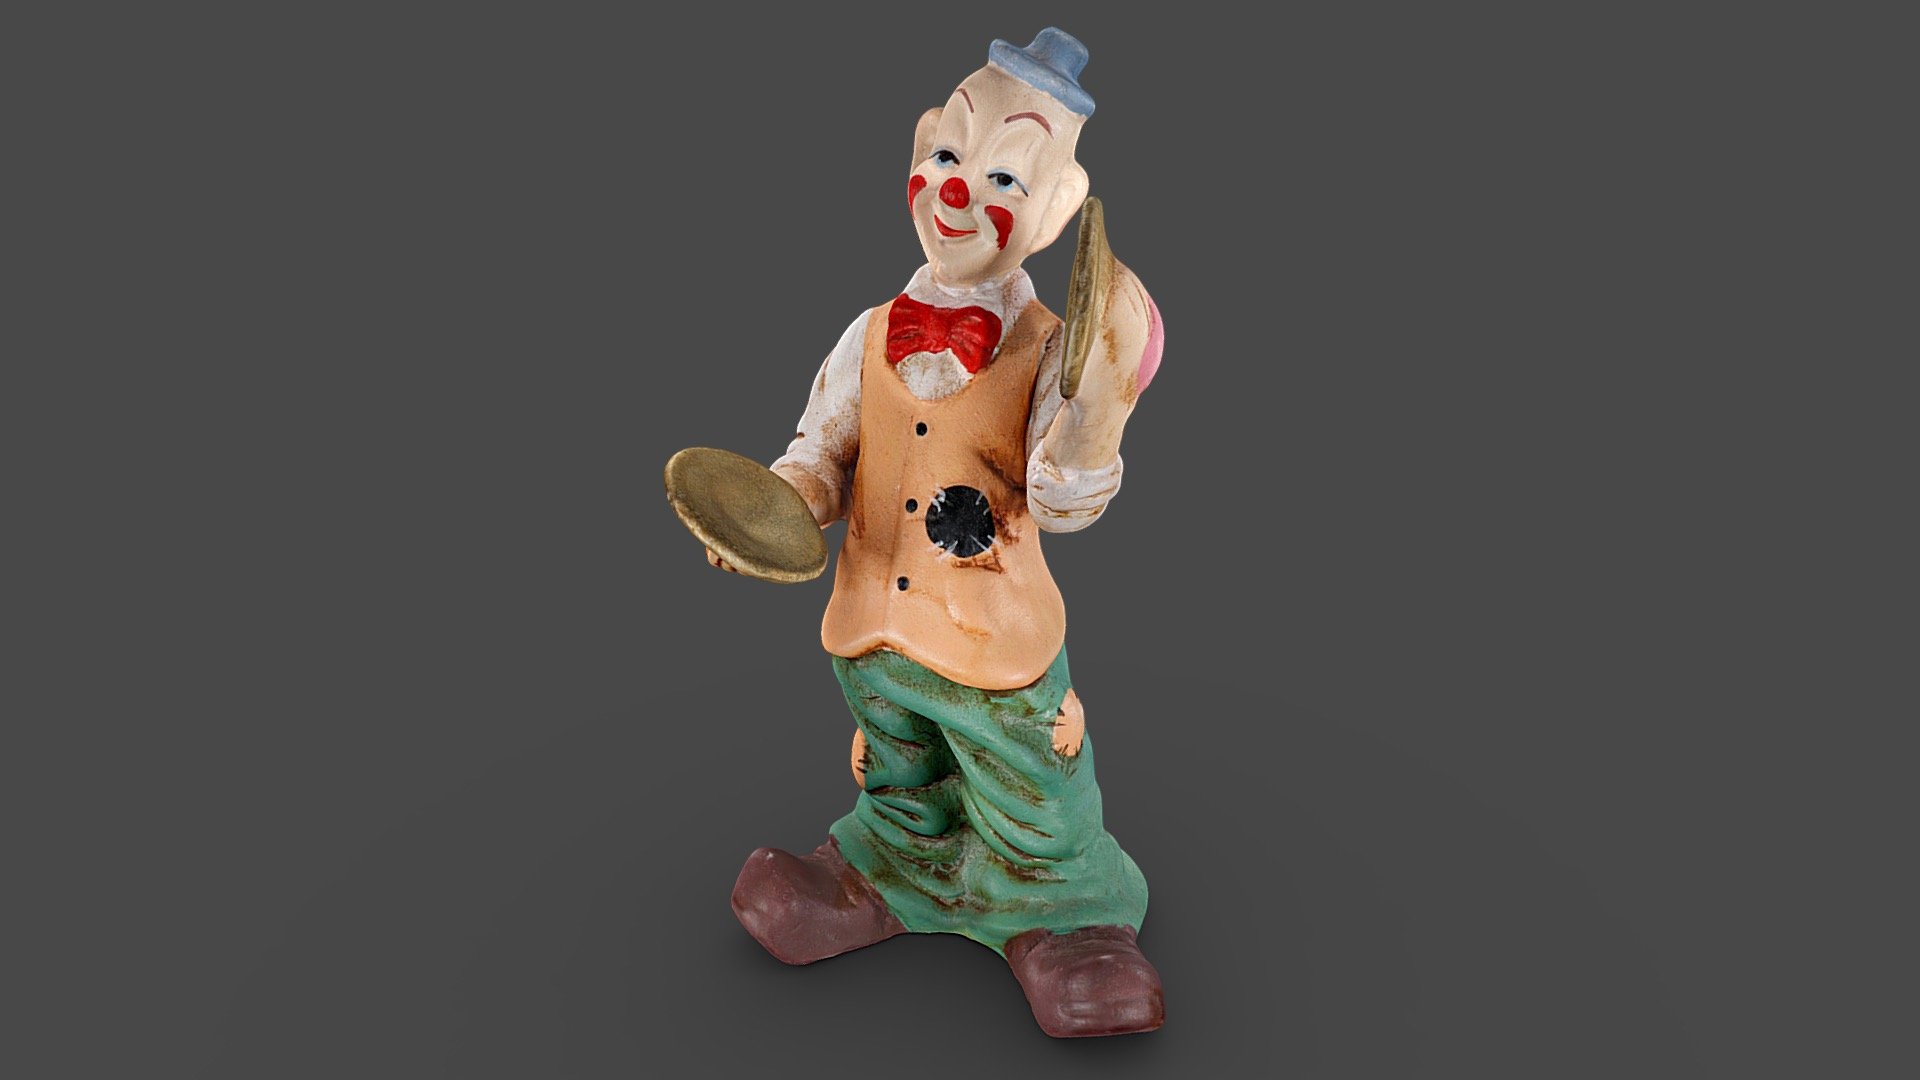 A cymbal playing clown statuette, standing roughly 10cm tall.
Captured with a Canon 800D, with CPL filter 3d model